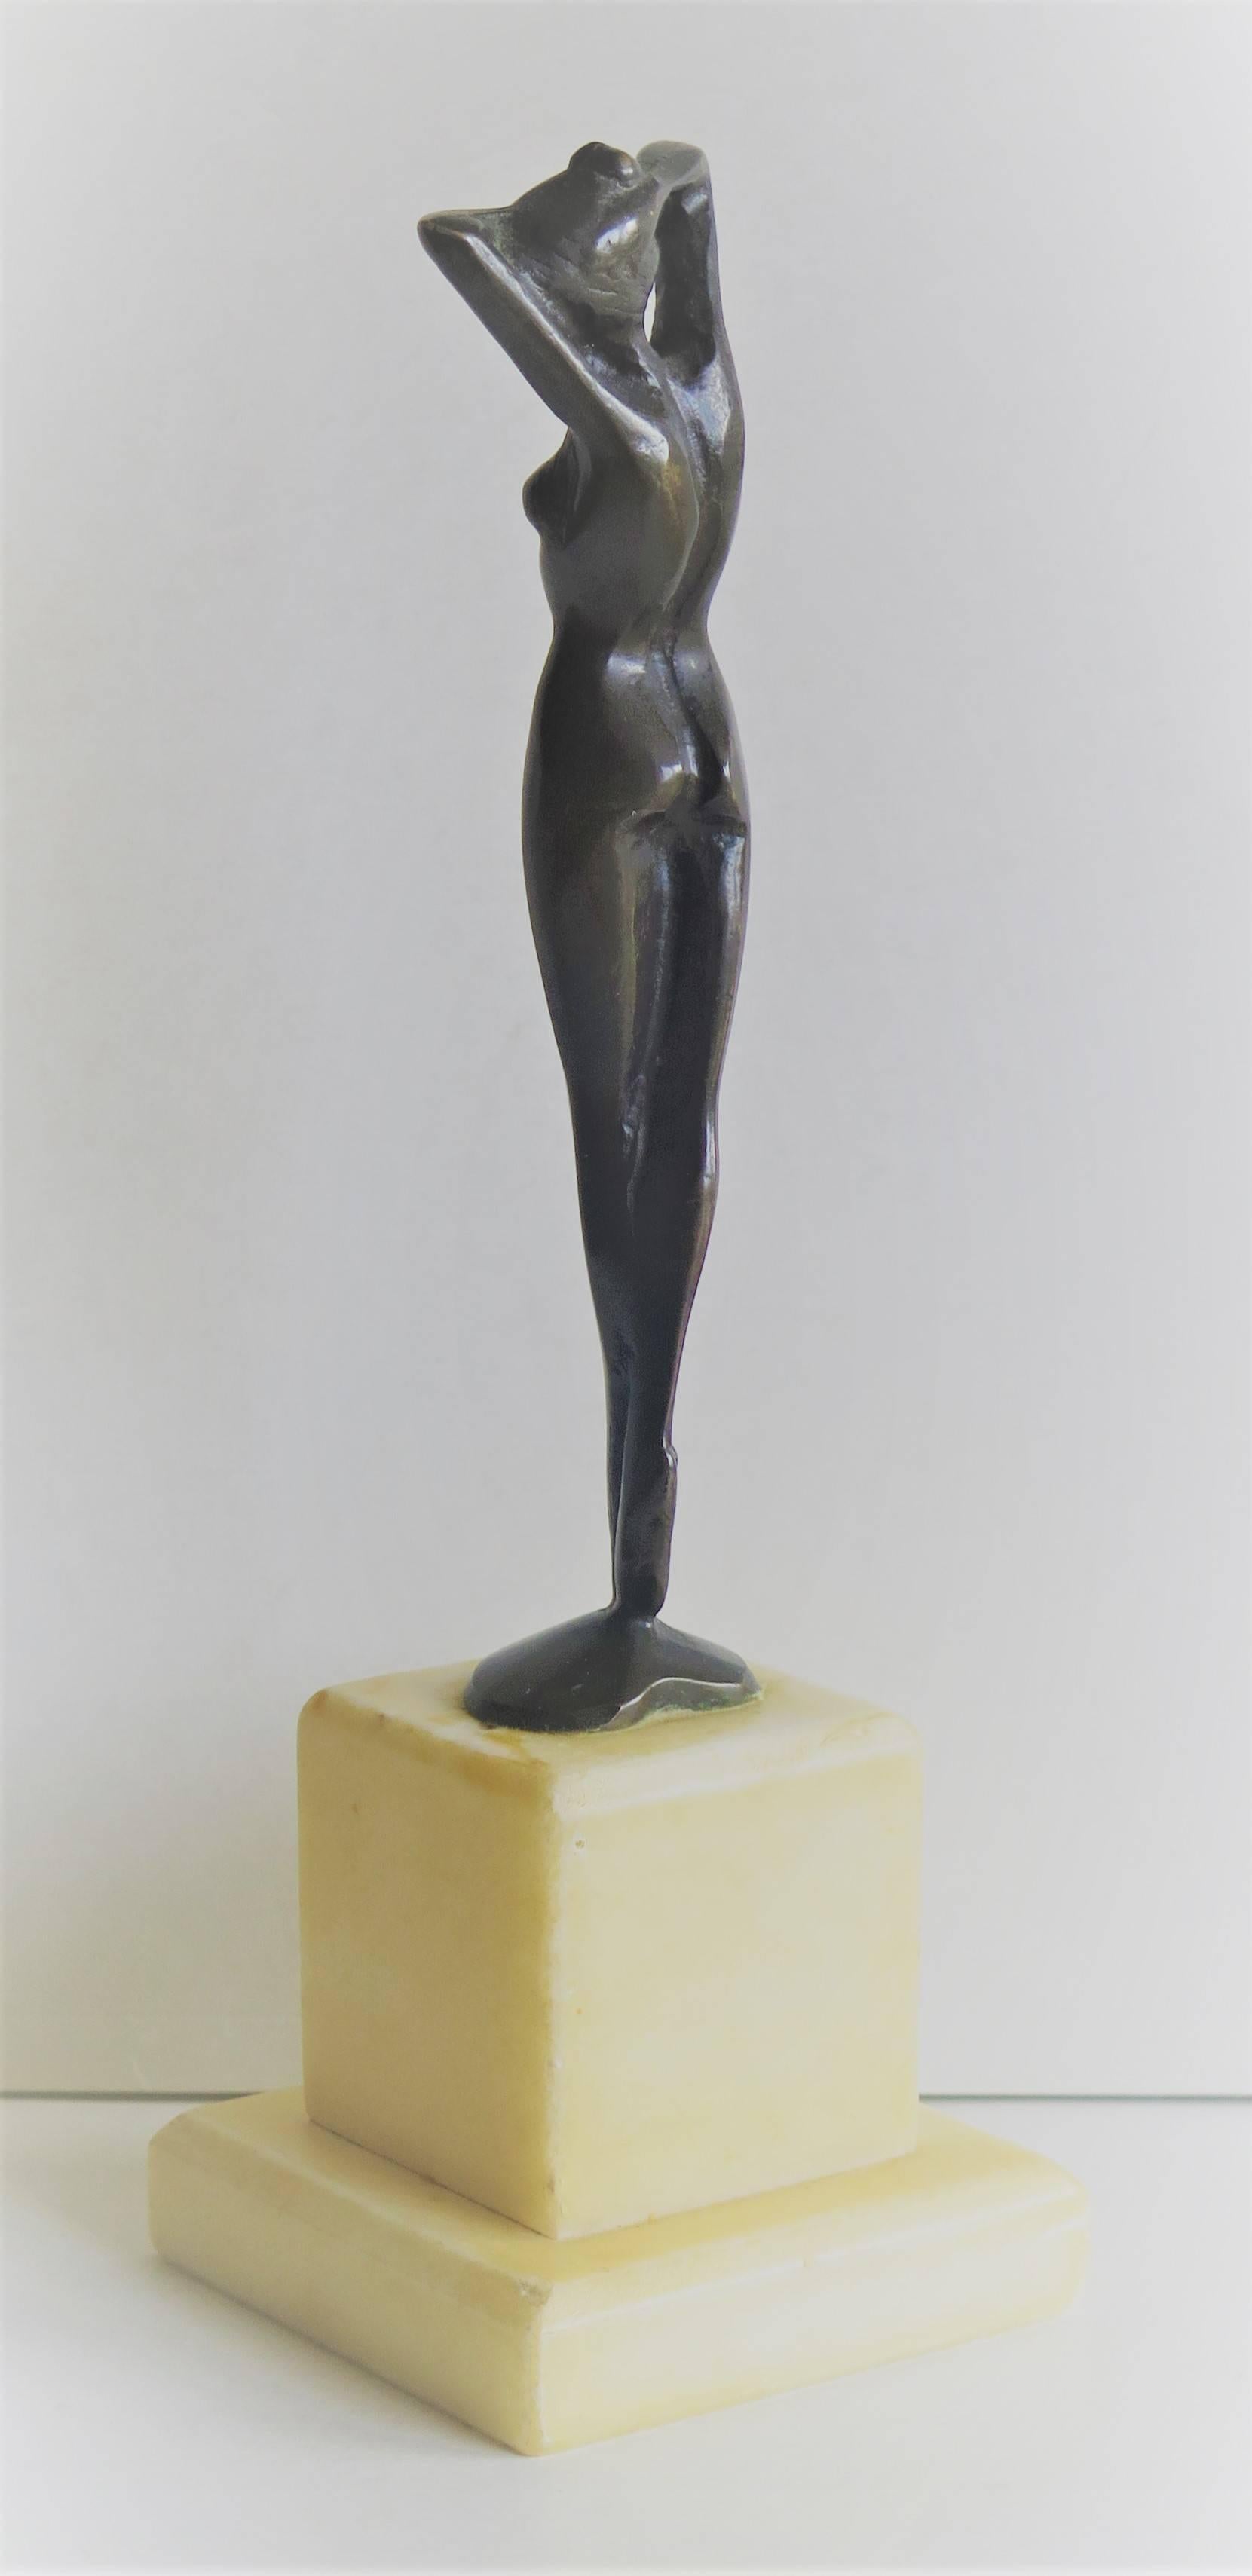 This is a solid bronze figurine of a nude lady.

The figure is beautifully sculpted in the style of Josef Lorenzl - see below - with the long limbed female form typical of Lorenzl and the Art Deco period generally. The circular bronze base of the